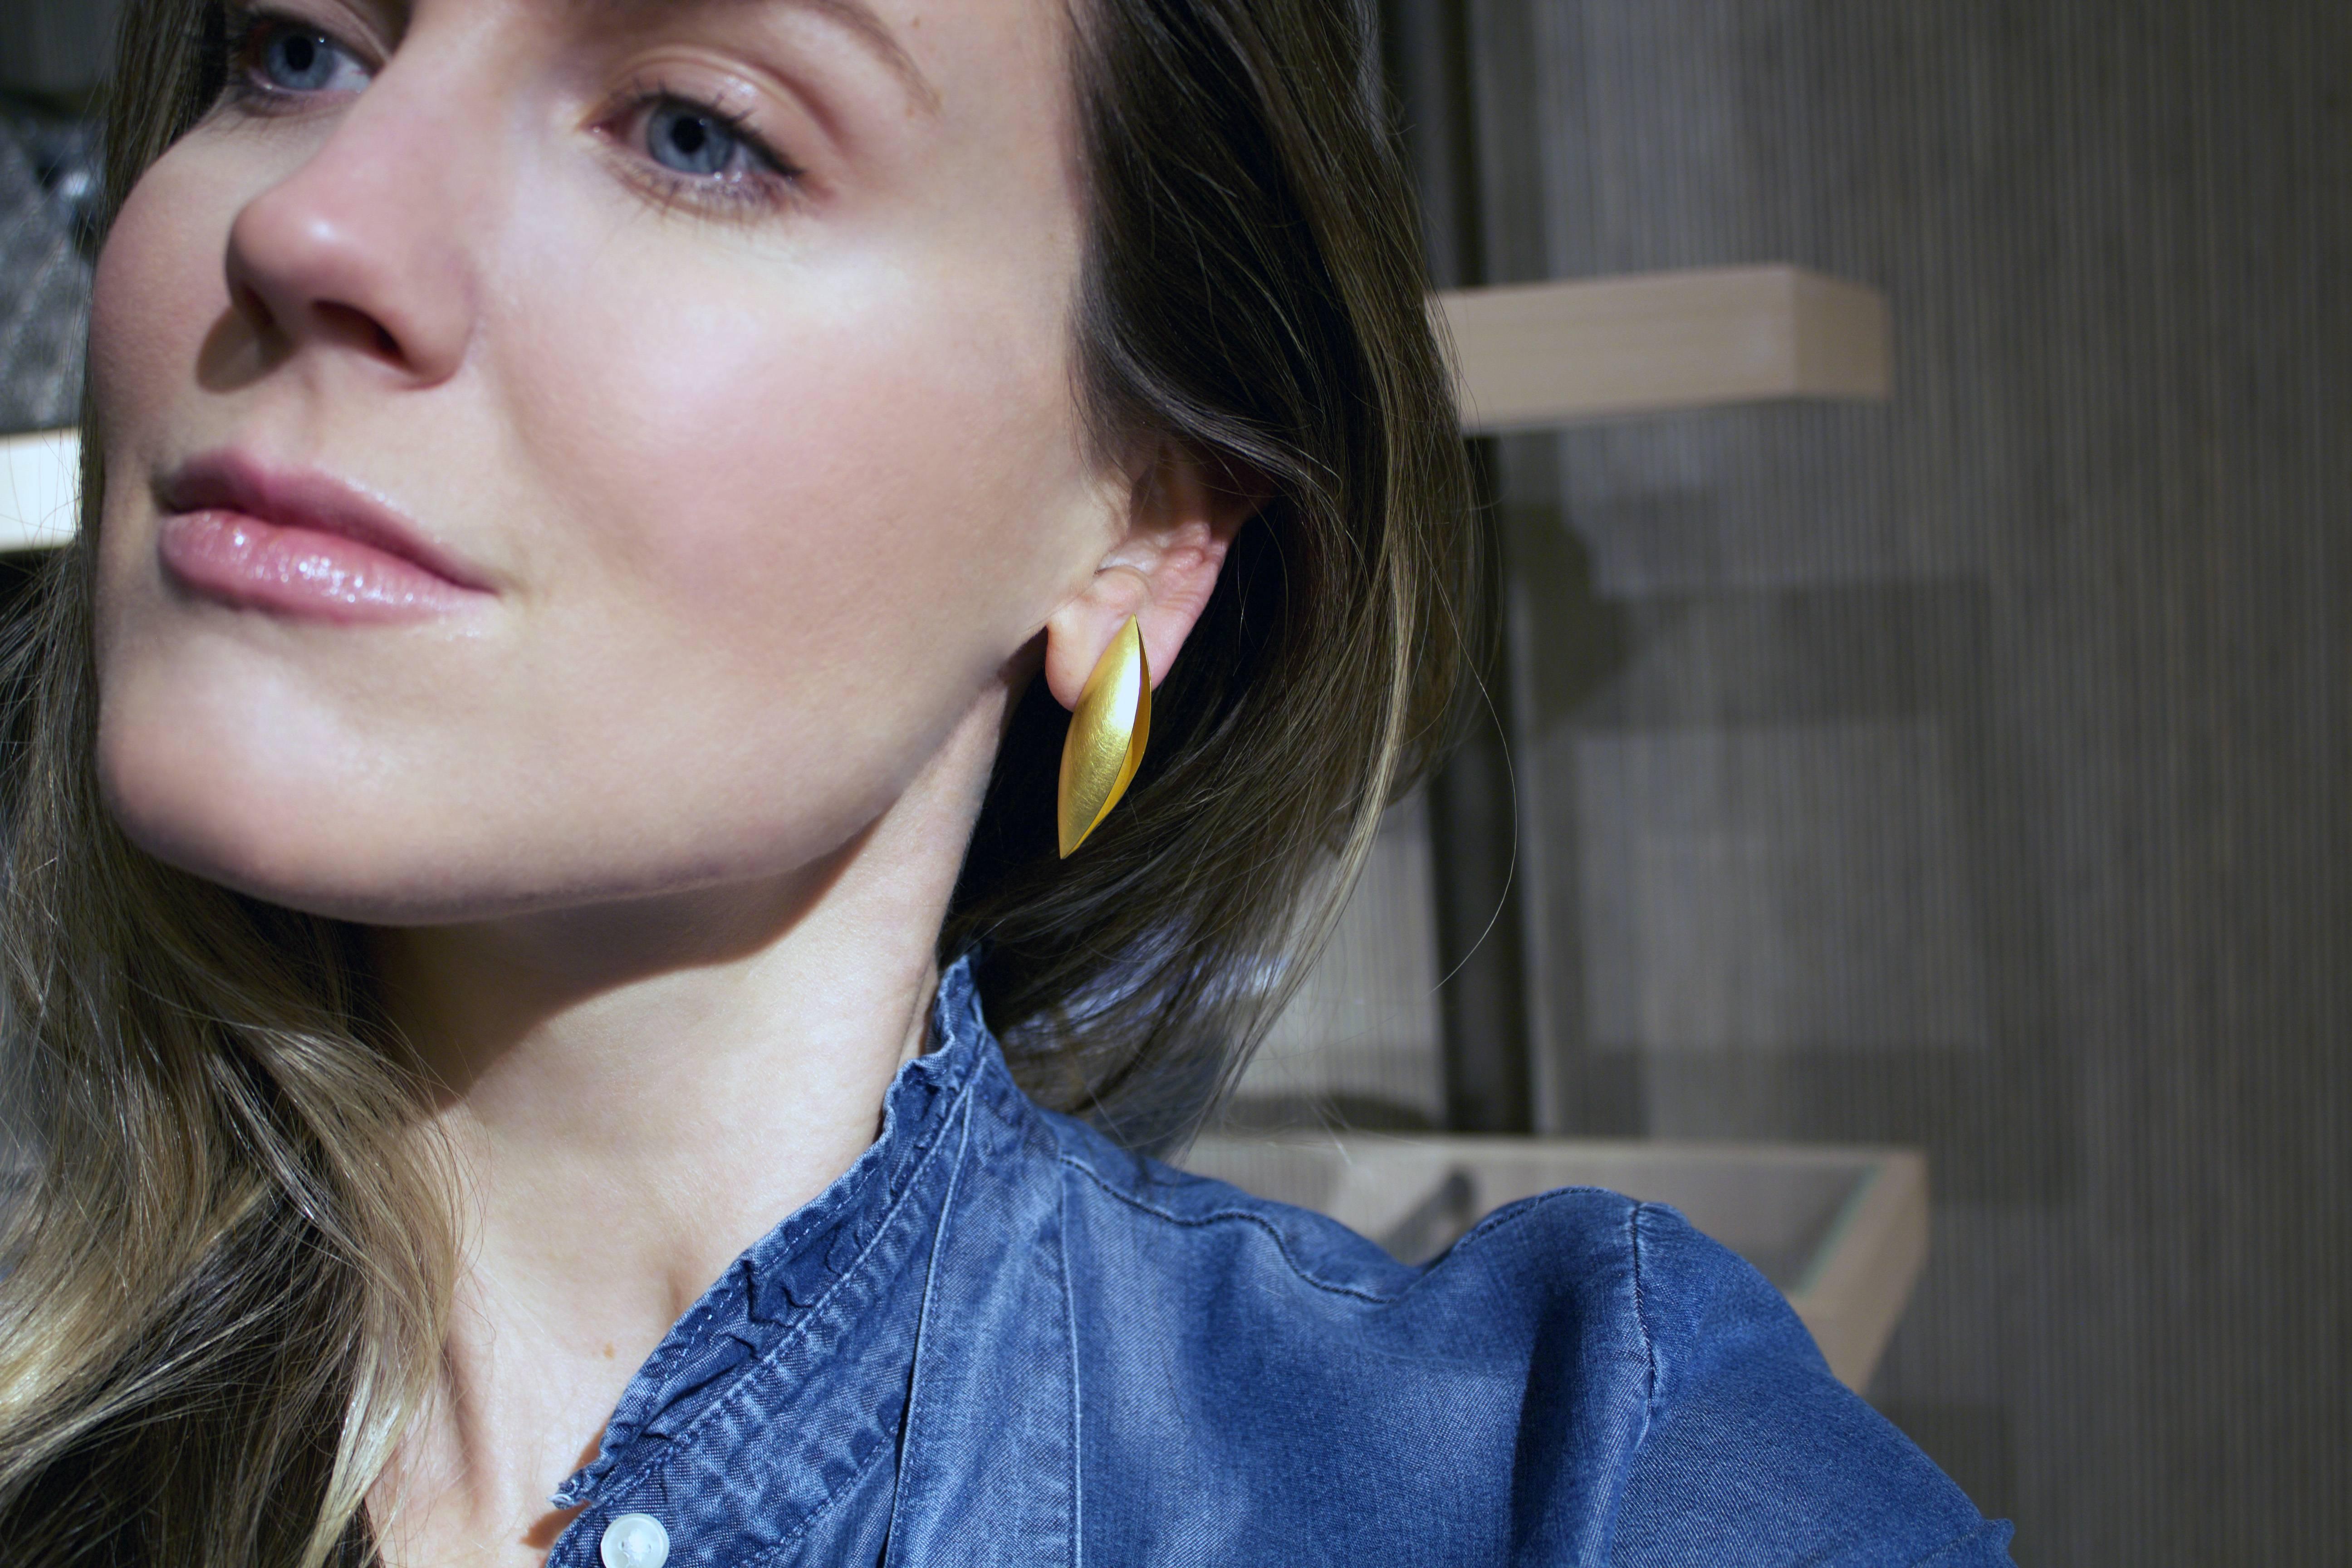 Cocoon Stud Drop Earrings handcrafted in Idar Oberstein, Germany by renowned master metalsmith, gemcutter, and jewelry designer Erich Zimmermann featuring a pair of the artist's signature open cocoon pod elements handmade in matte 18k yellow gold